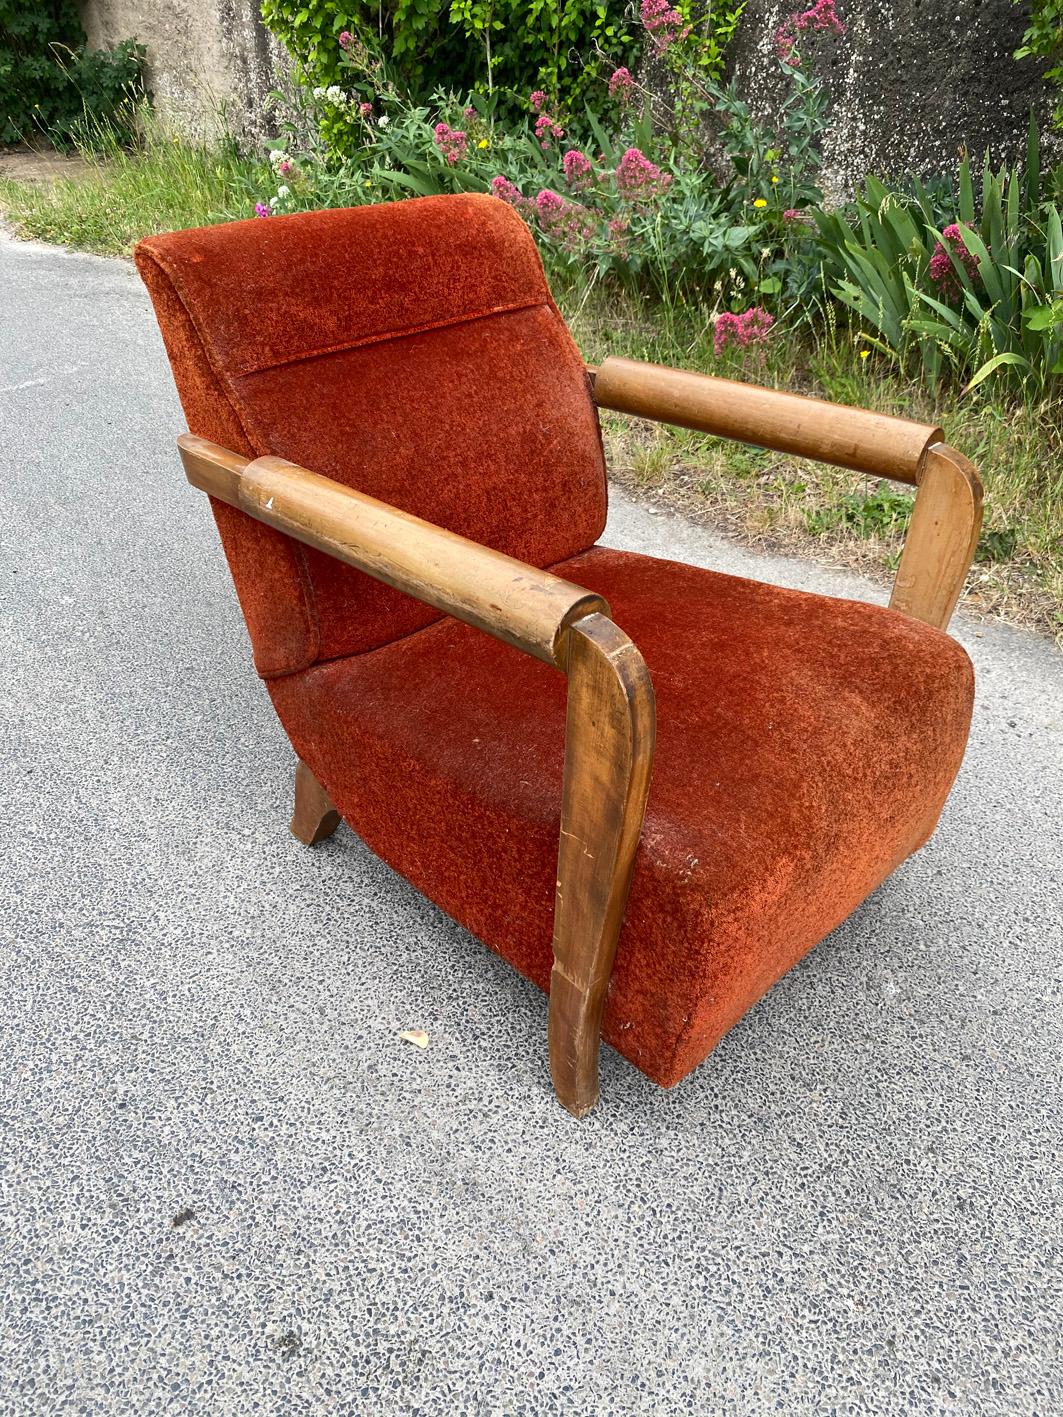 Large Art Deco armchair in the style of André Domin, circa 1930.